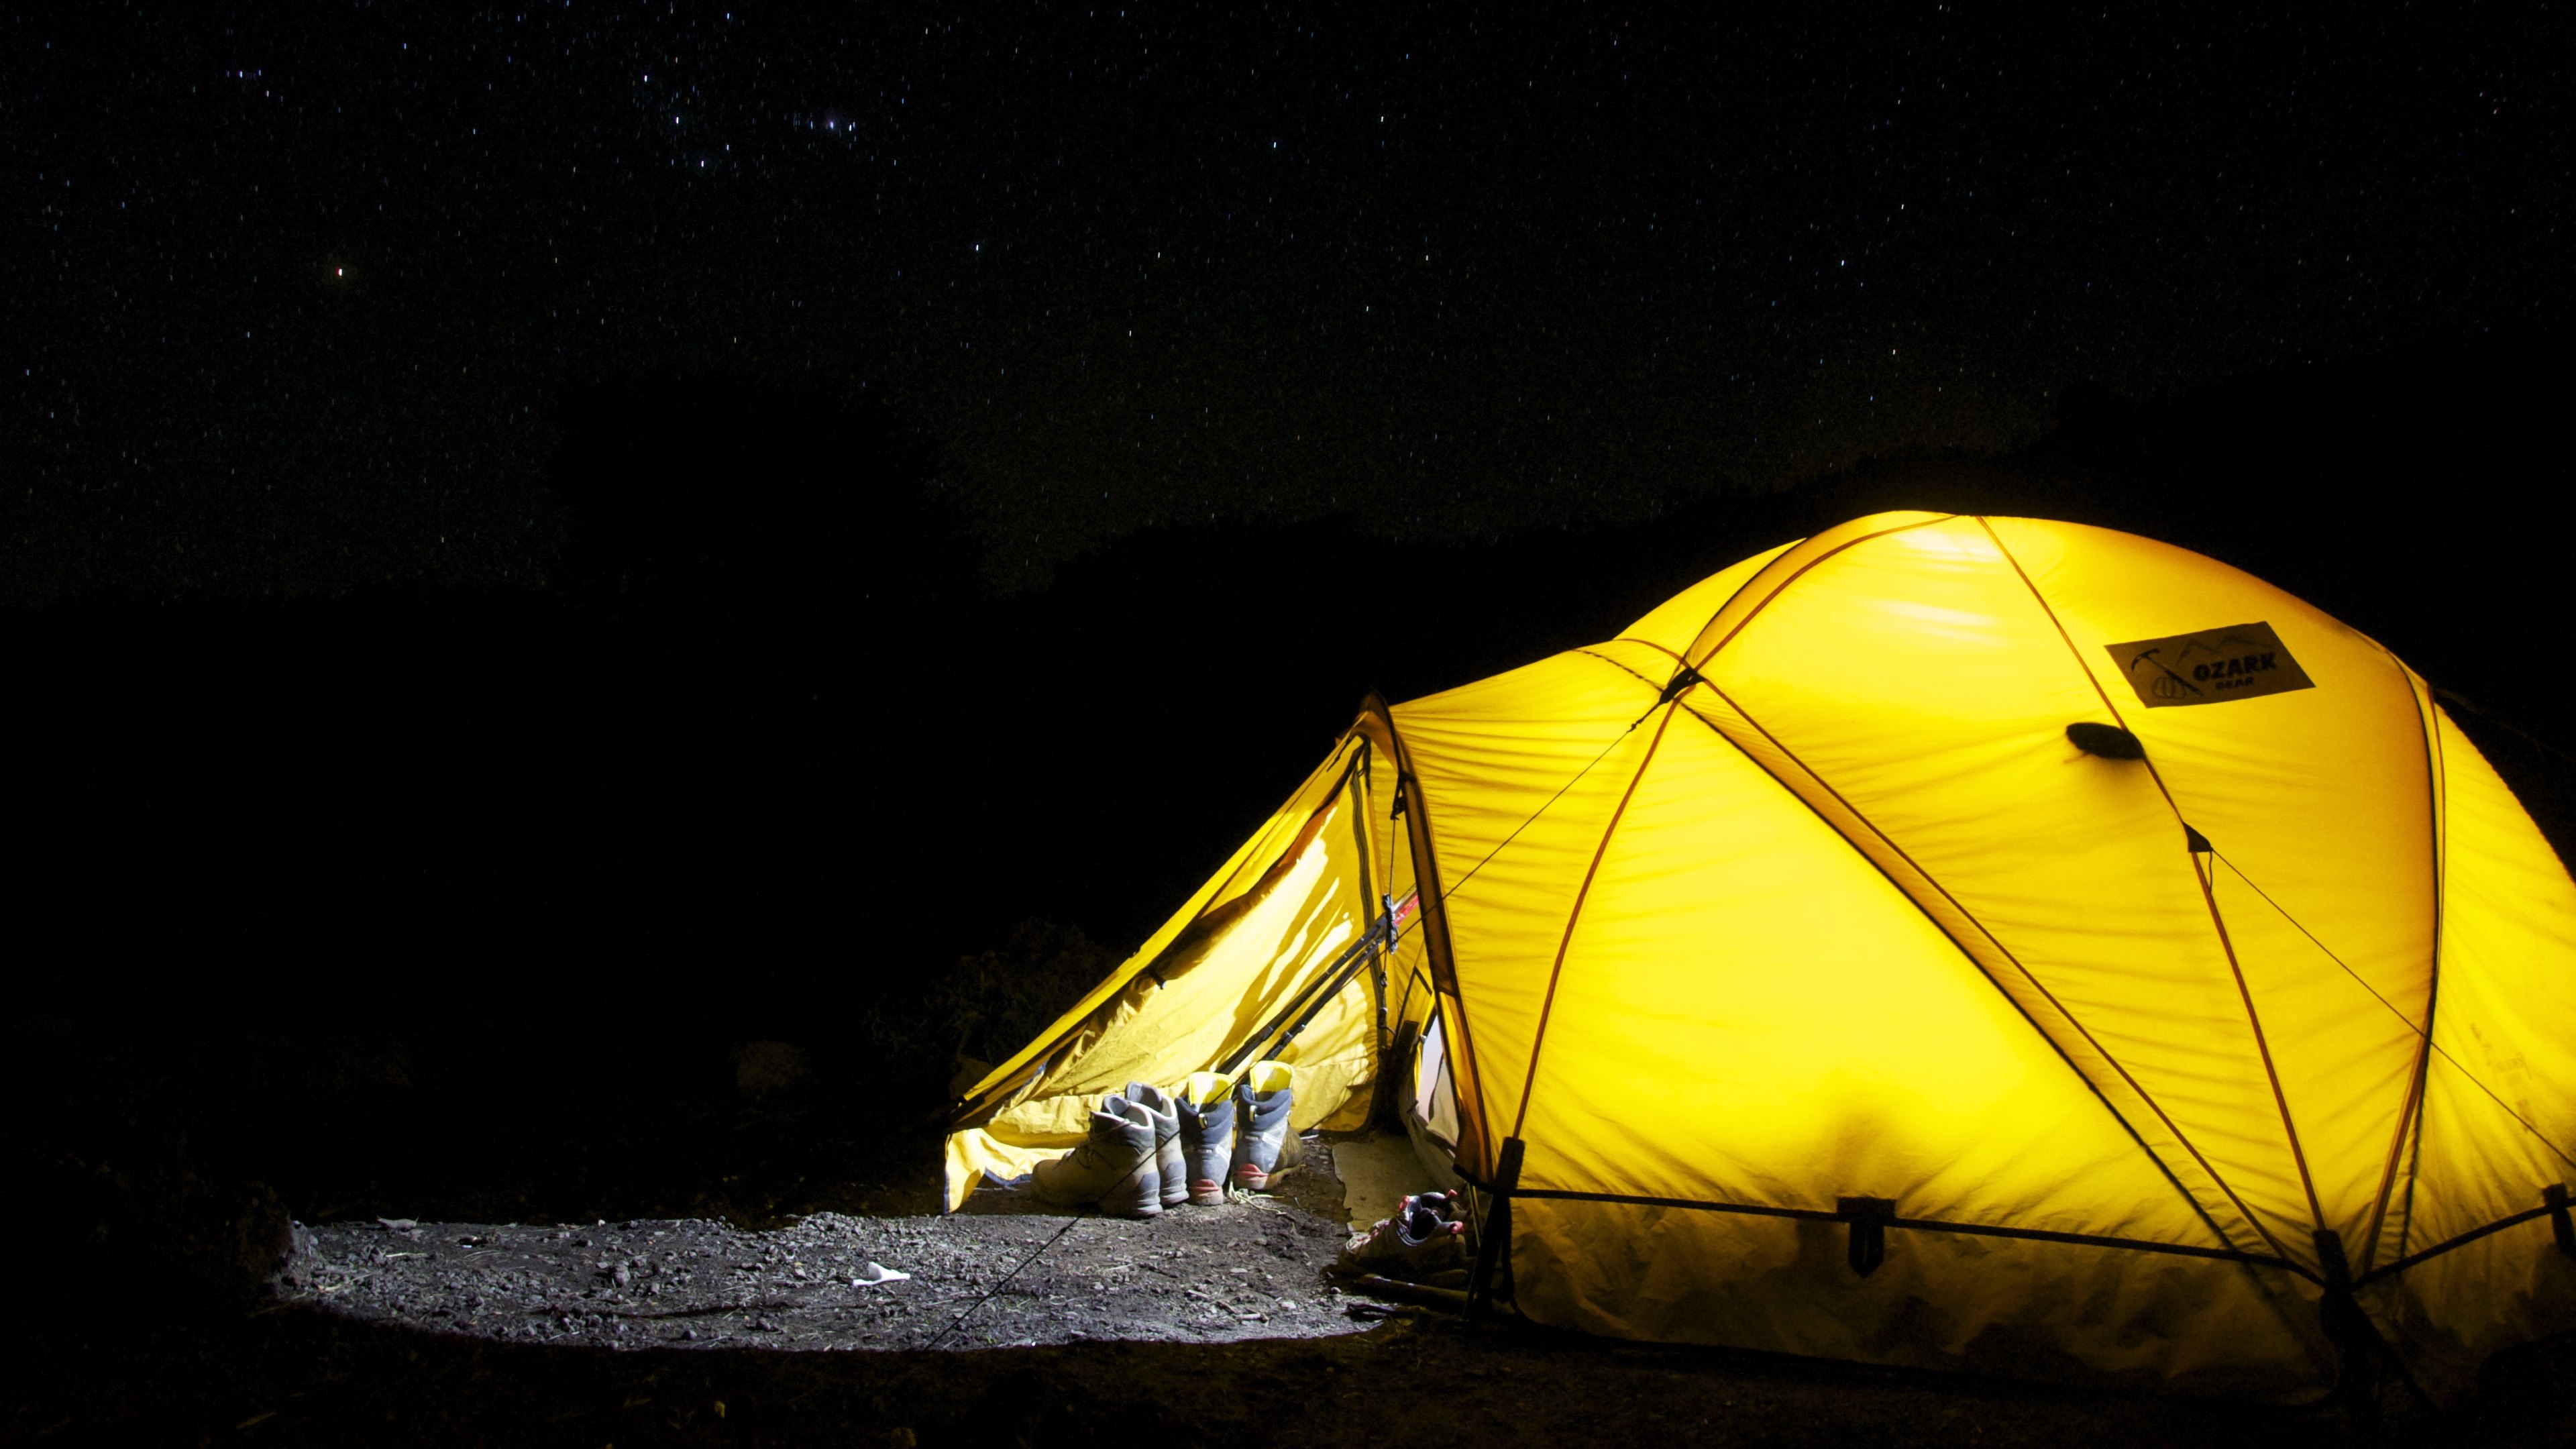 Wallpaper Cc0 Camping With Tent In The Night Stars Above